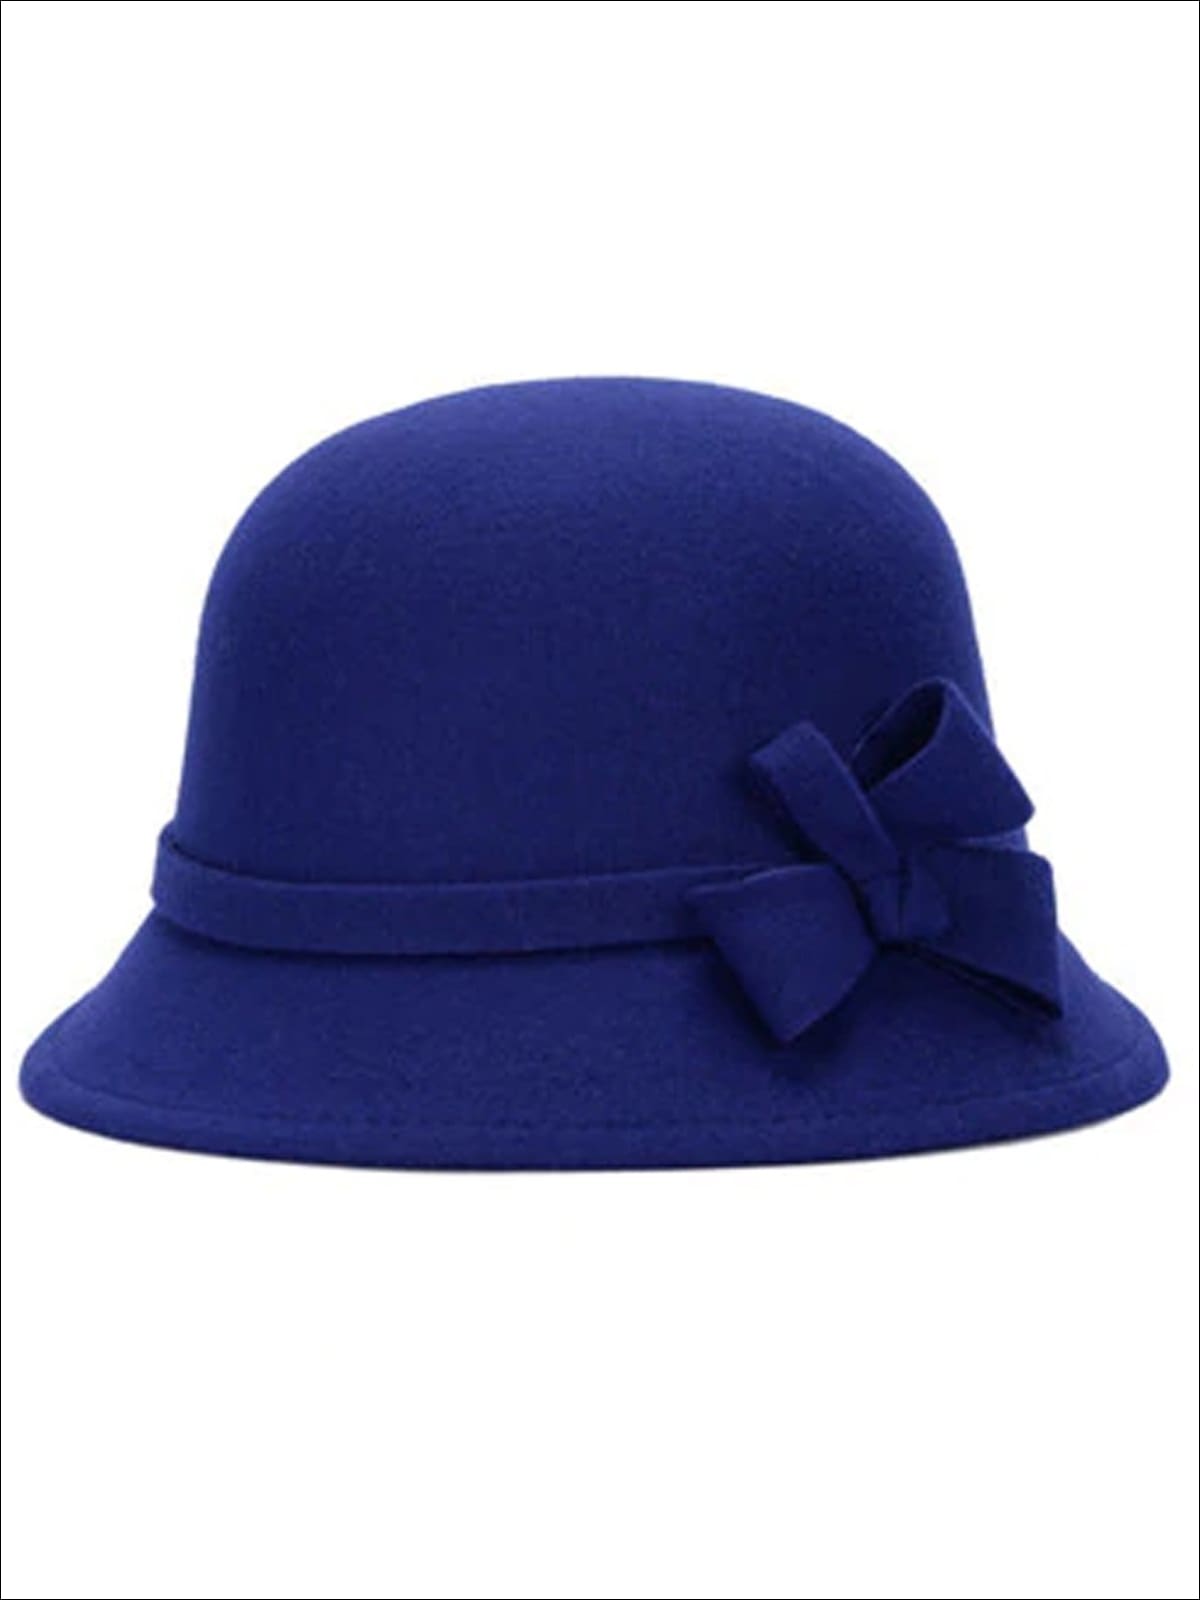 Womens Trendy Bow Tie Bowler Hat - Royal Blue - Womens Hats